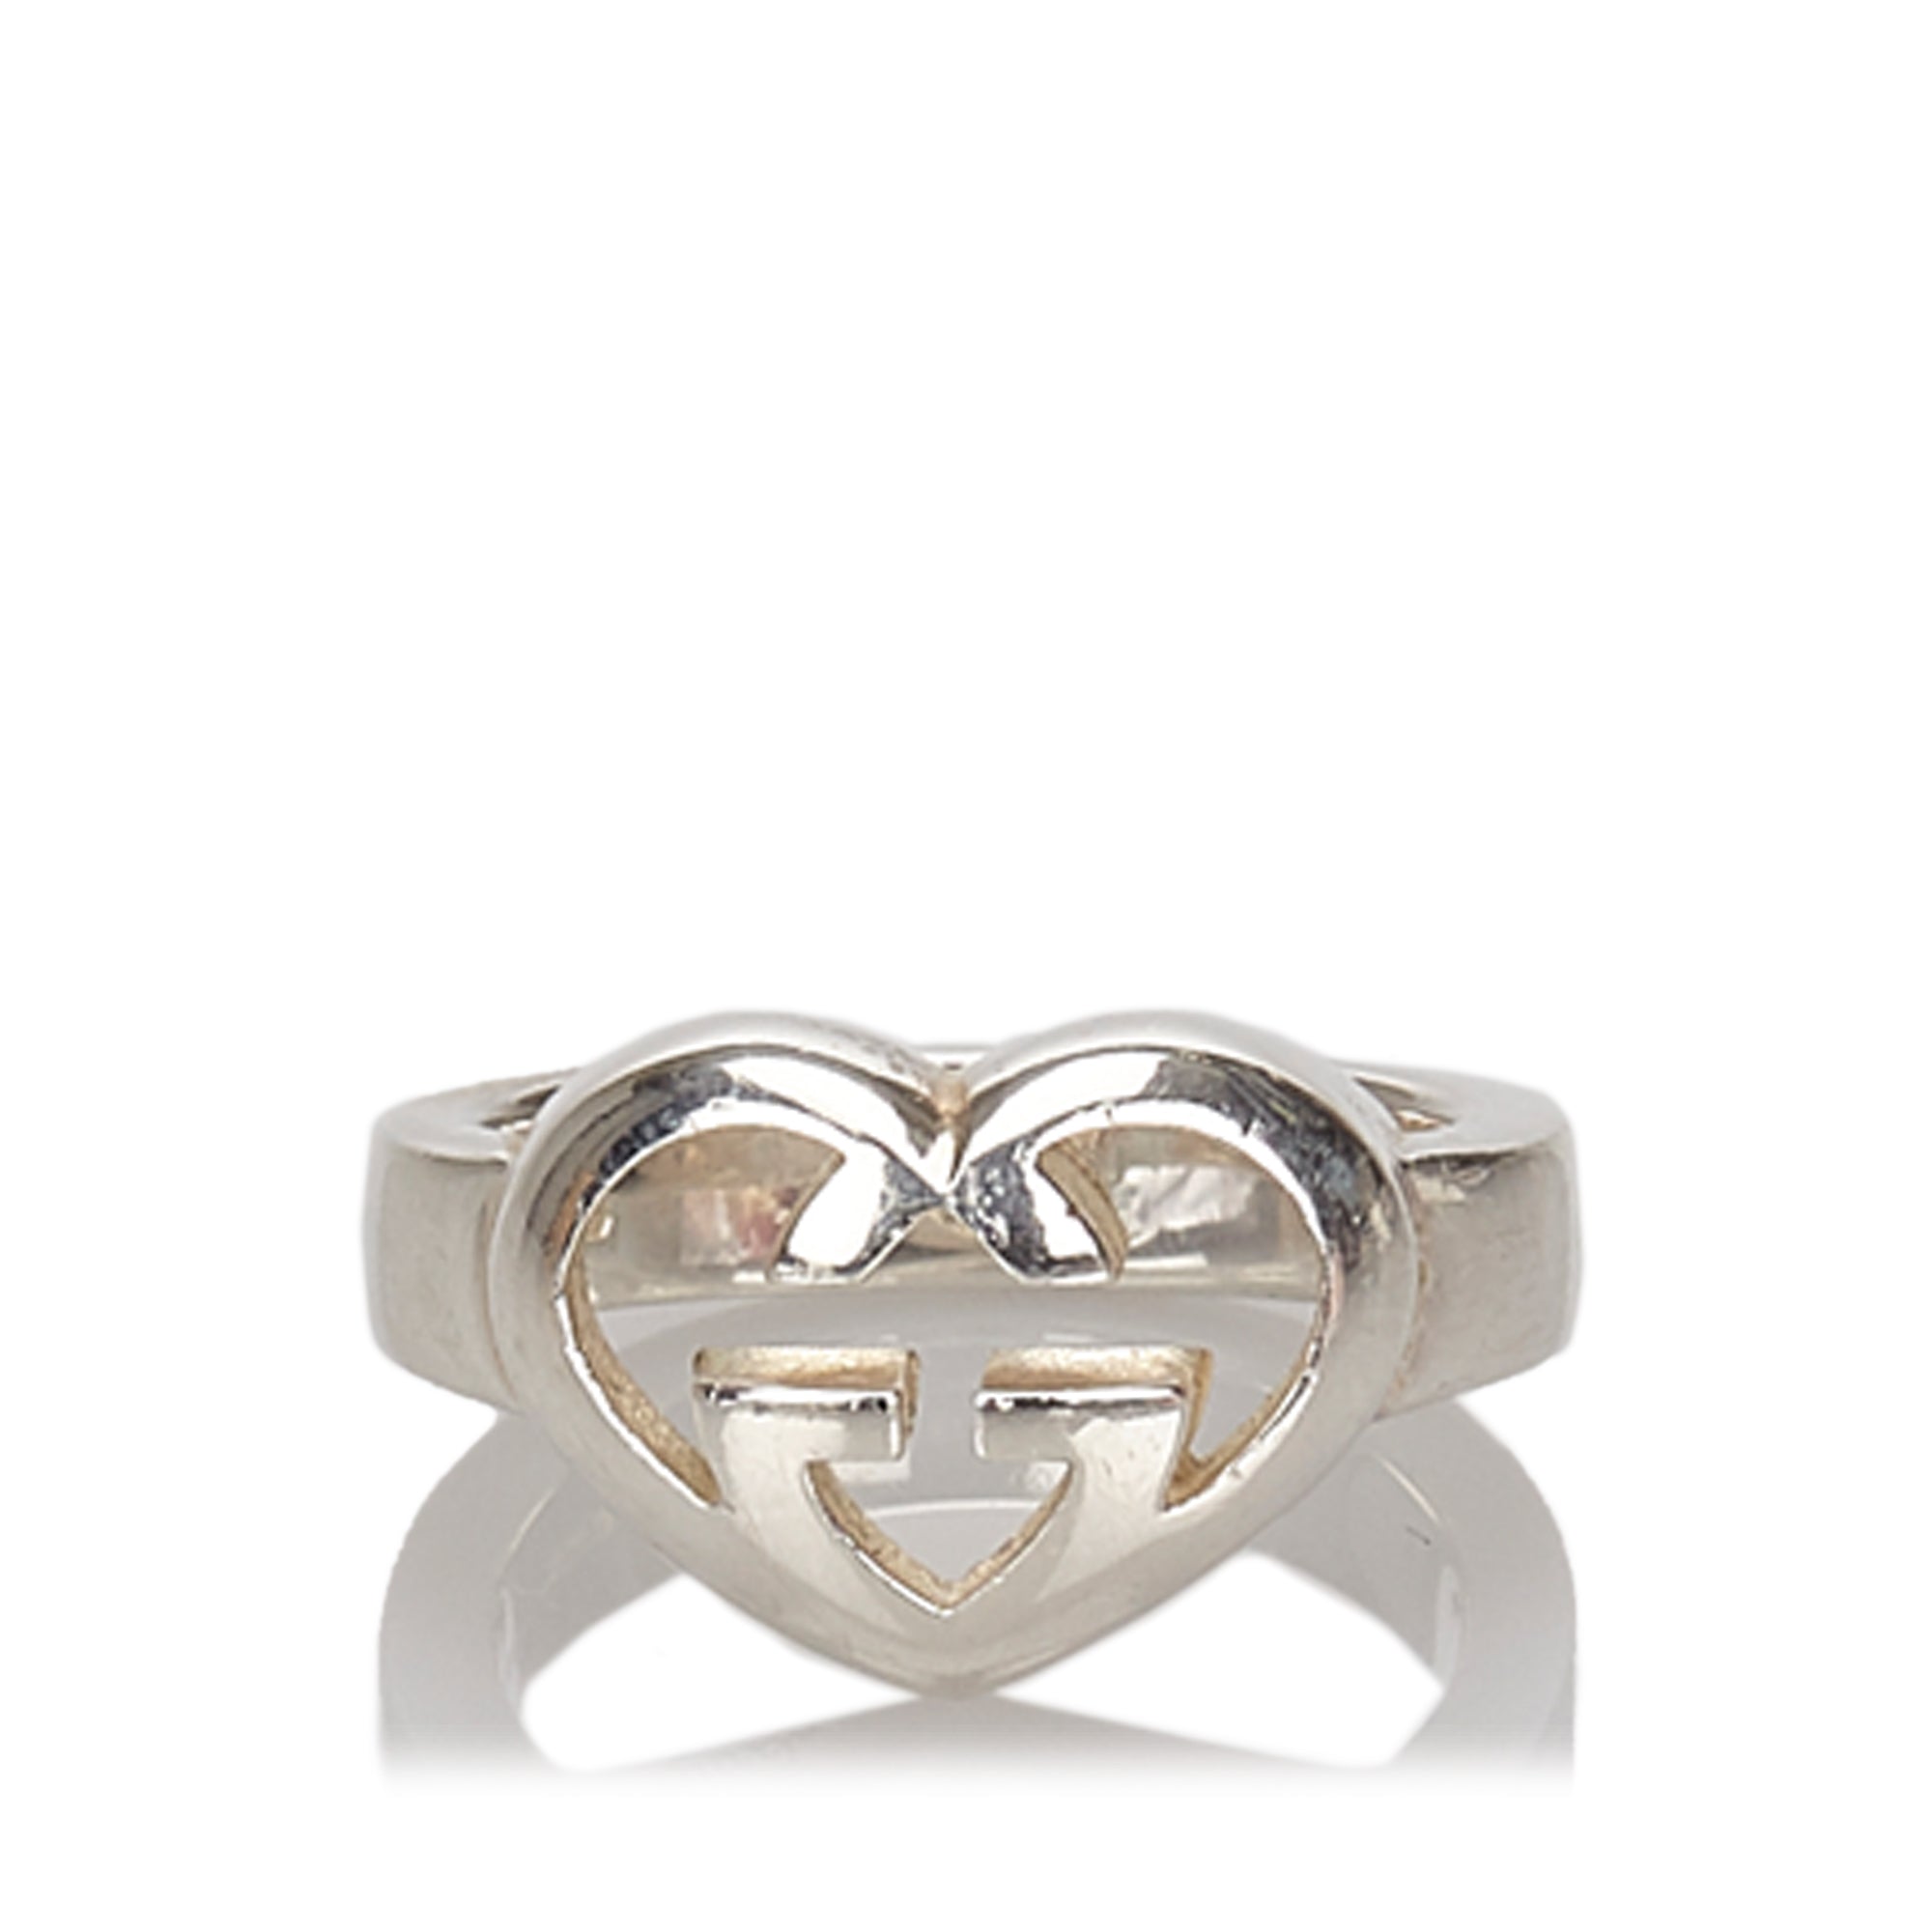 Buy & Consign Authentic Gucci GG Heart Ring at The Plush Posh